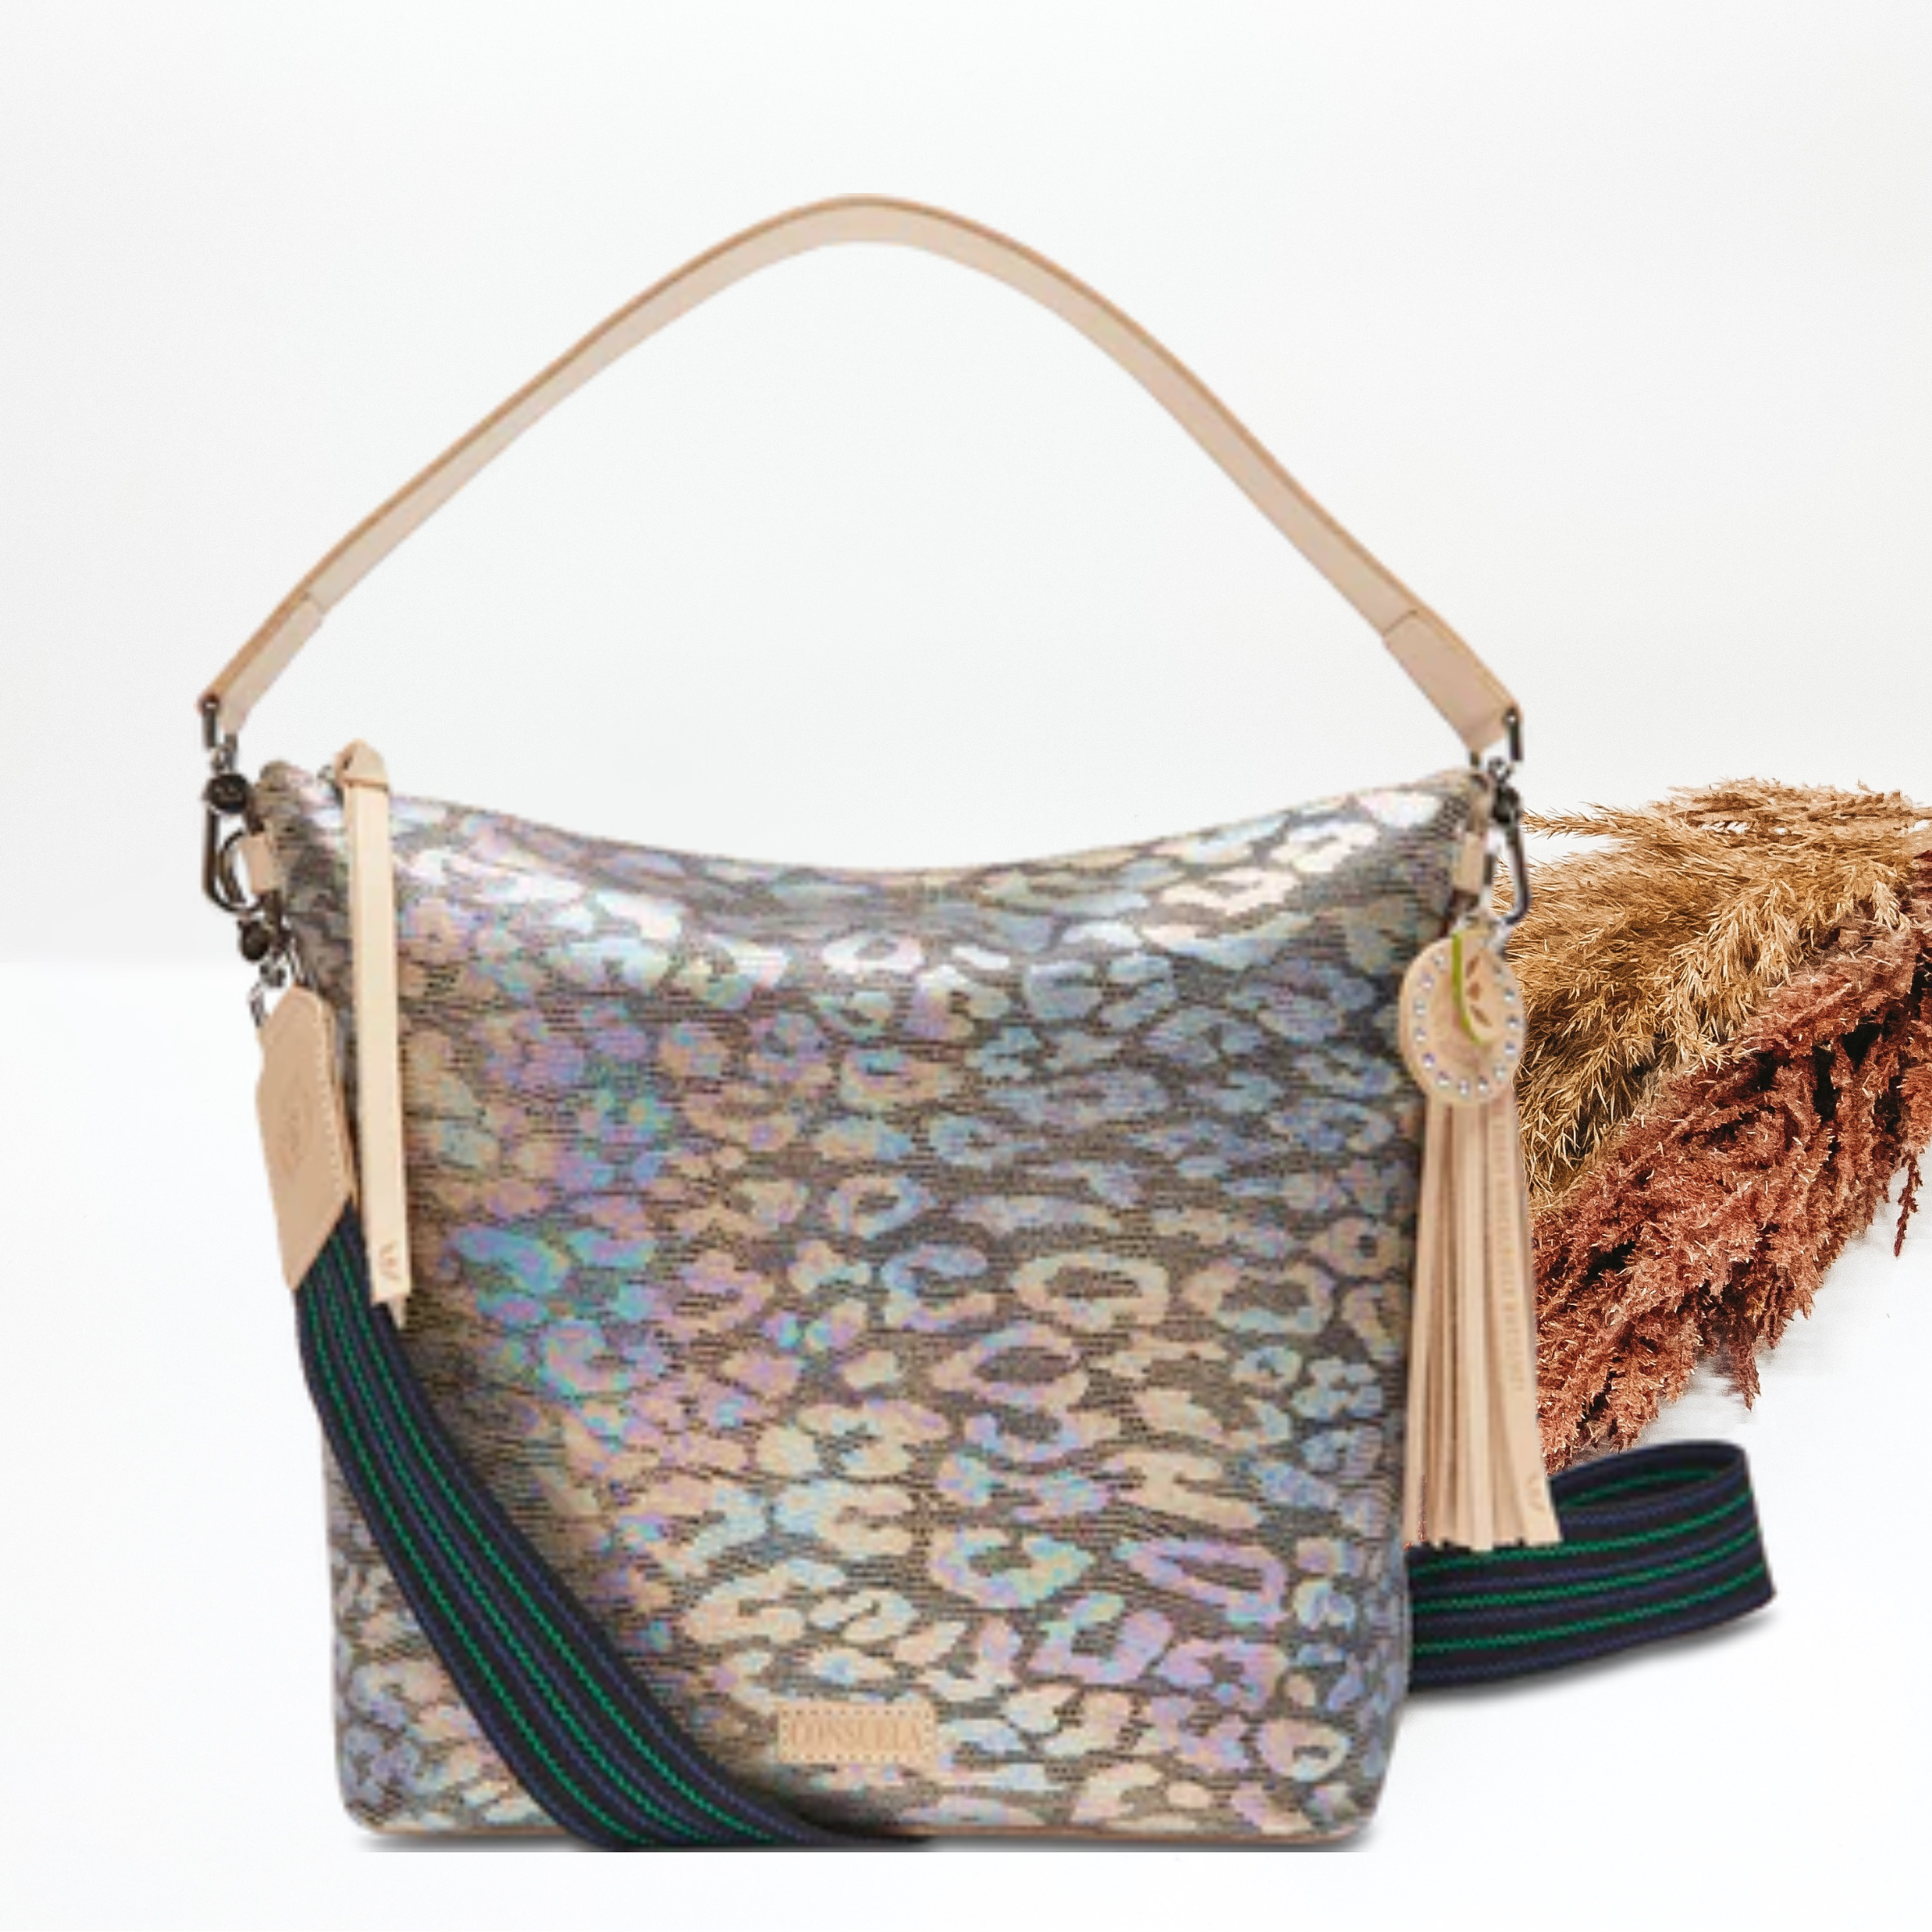 Pictured is hobo purse that has a metallic, multicolor leopard print deisgn. This purse includes a thick, light tan strap and striped, thick purse strap. This purse is pictured on a white background with pompous grass on the right side of the picture.